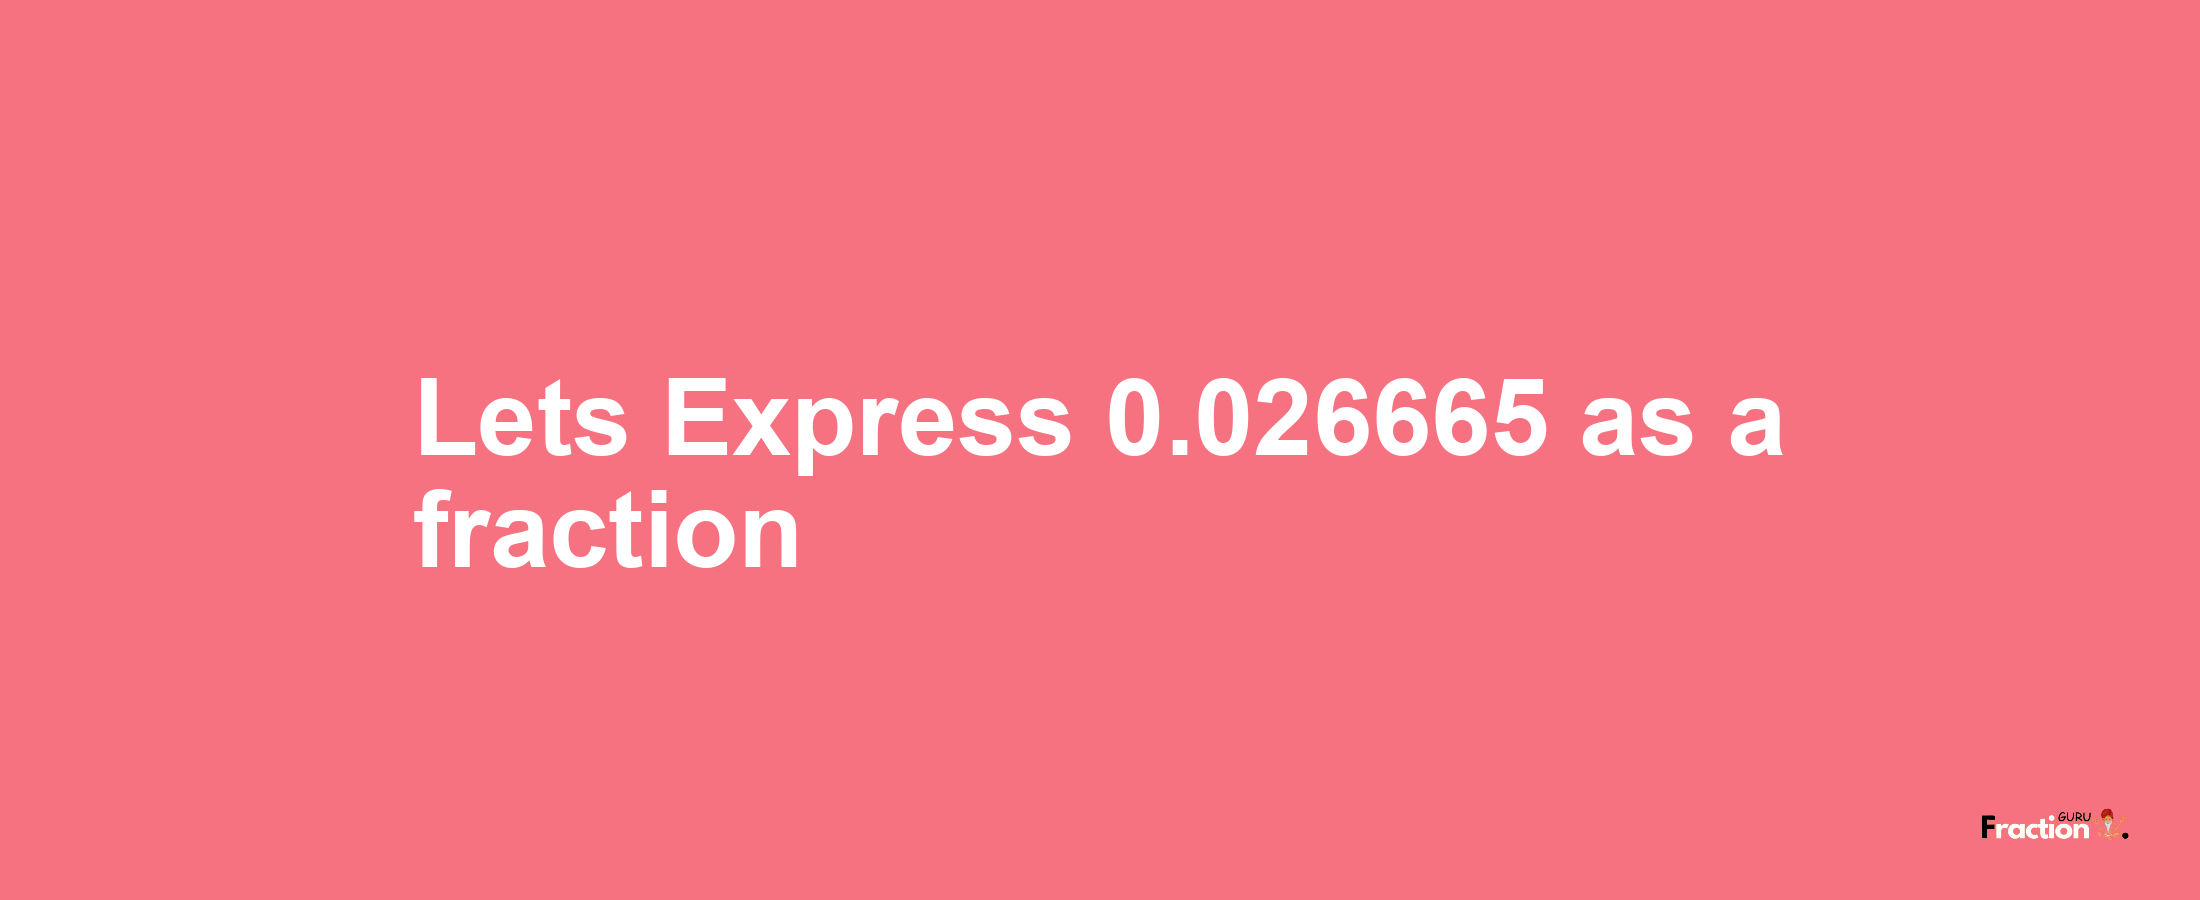 Lets Express 0.026665 as afraction